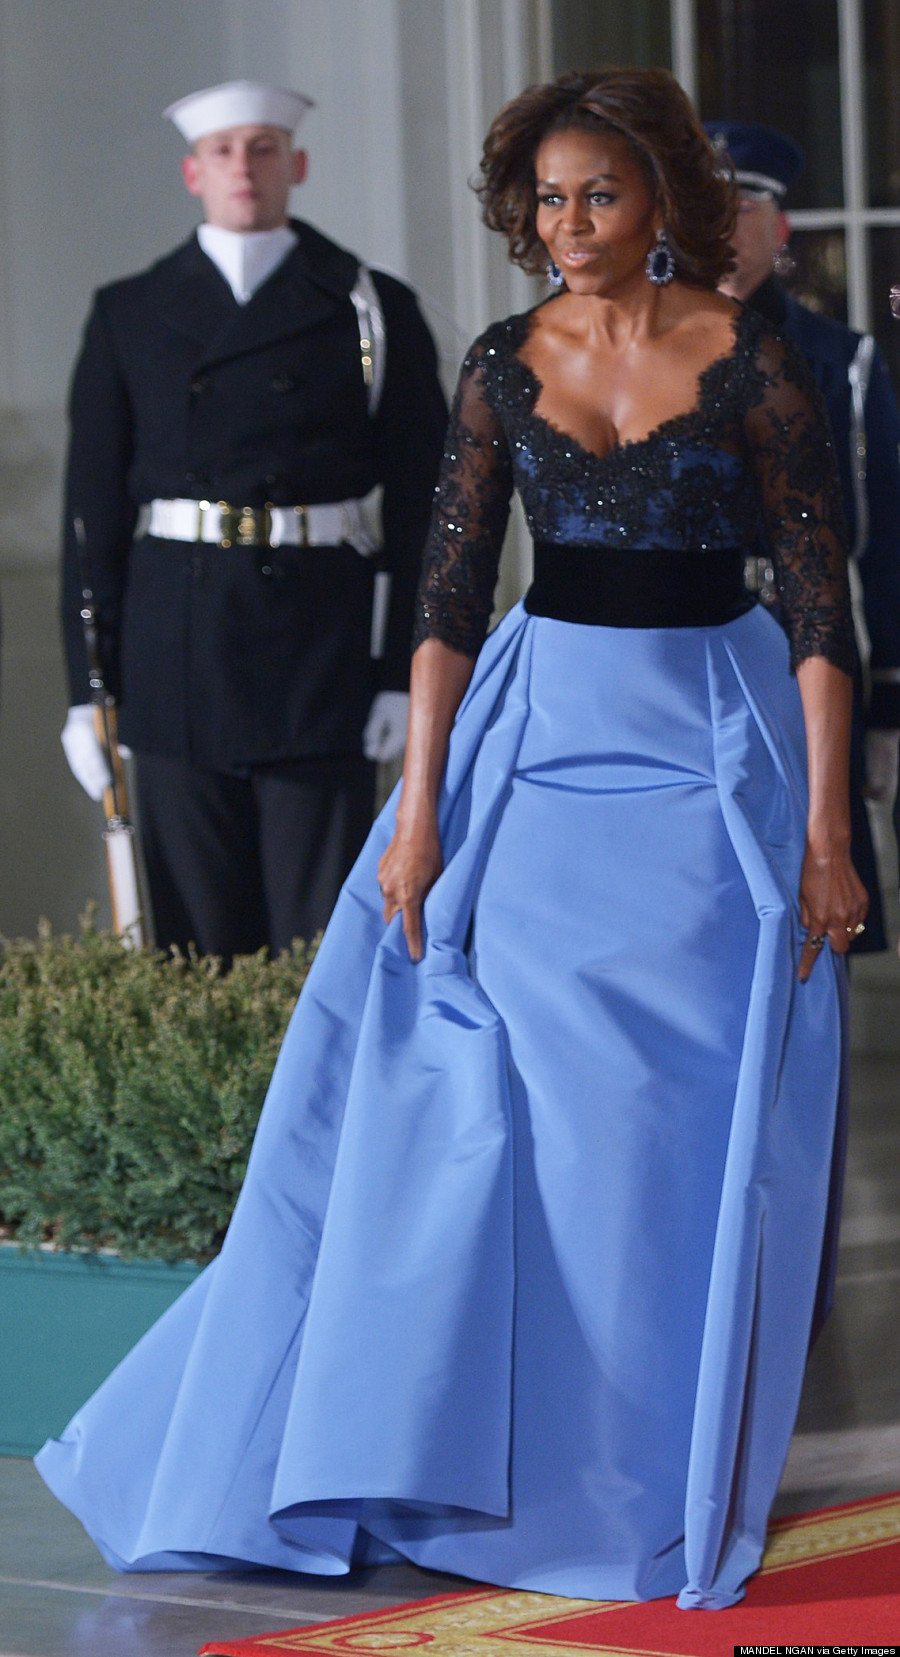 US President Barack Obama, First Lady Michelle Obama pose with French President Francois Hollande as he arrives for the State Dinner at the North Portico of the White House on February 11, 2014 in Washington, DC. AFP PHOTO/Mandel NGAN        (Photo credit should read MANDEL NGAN/AFP/Getty Images)